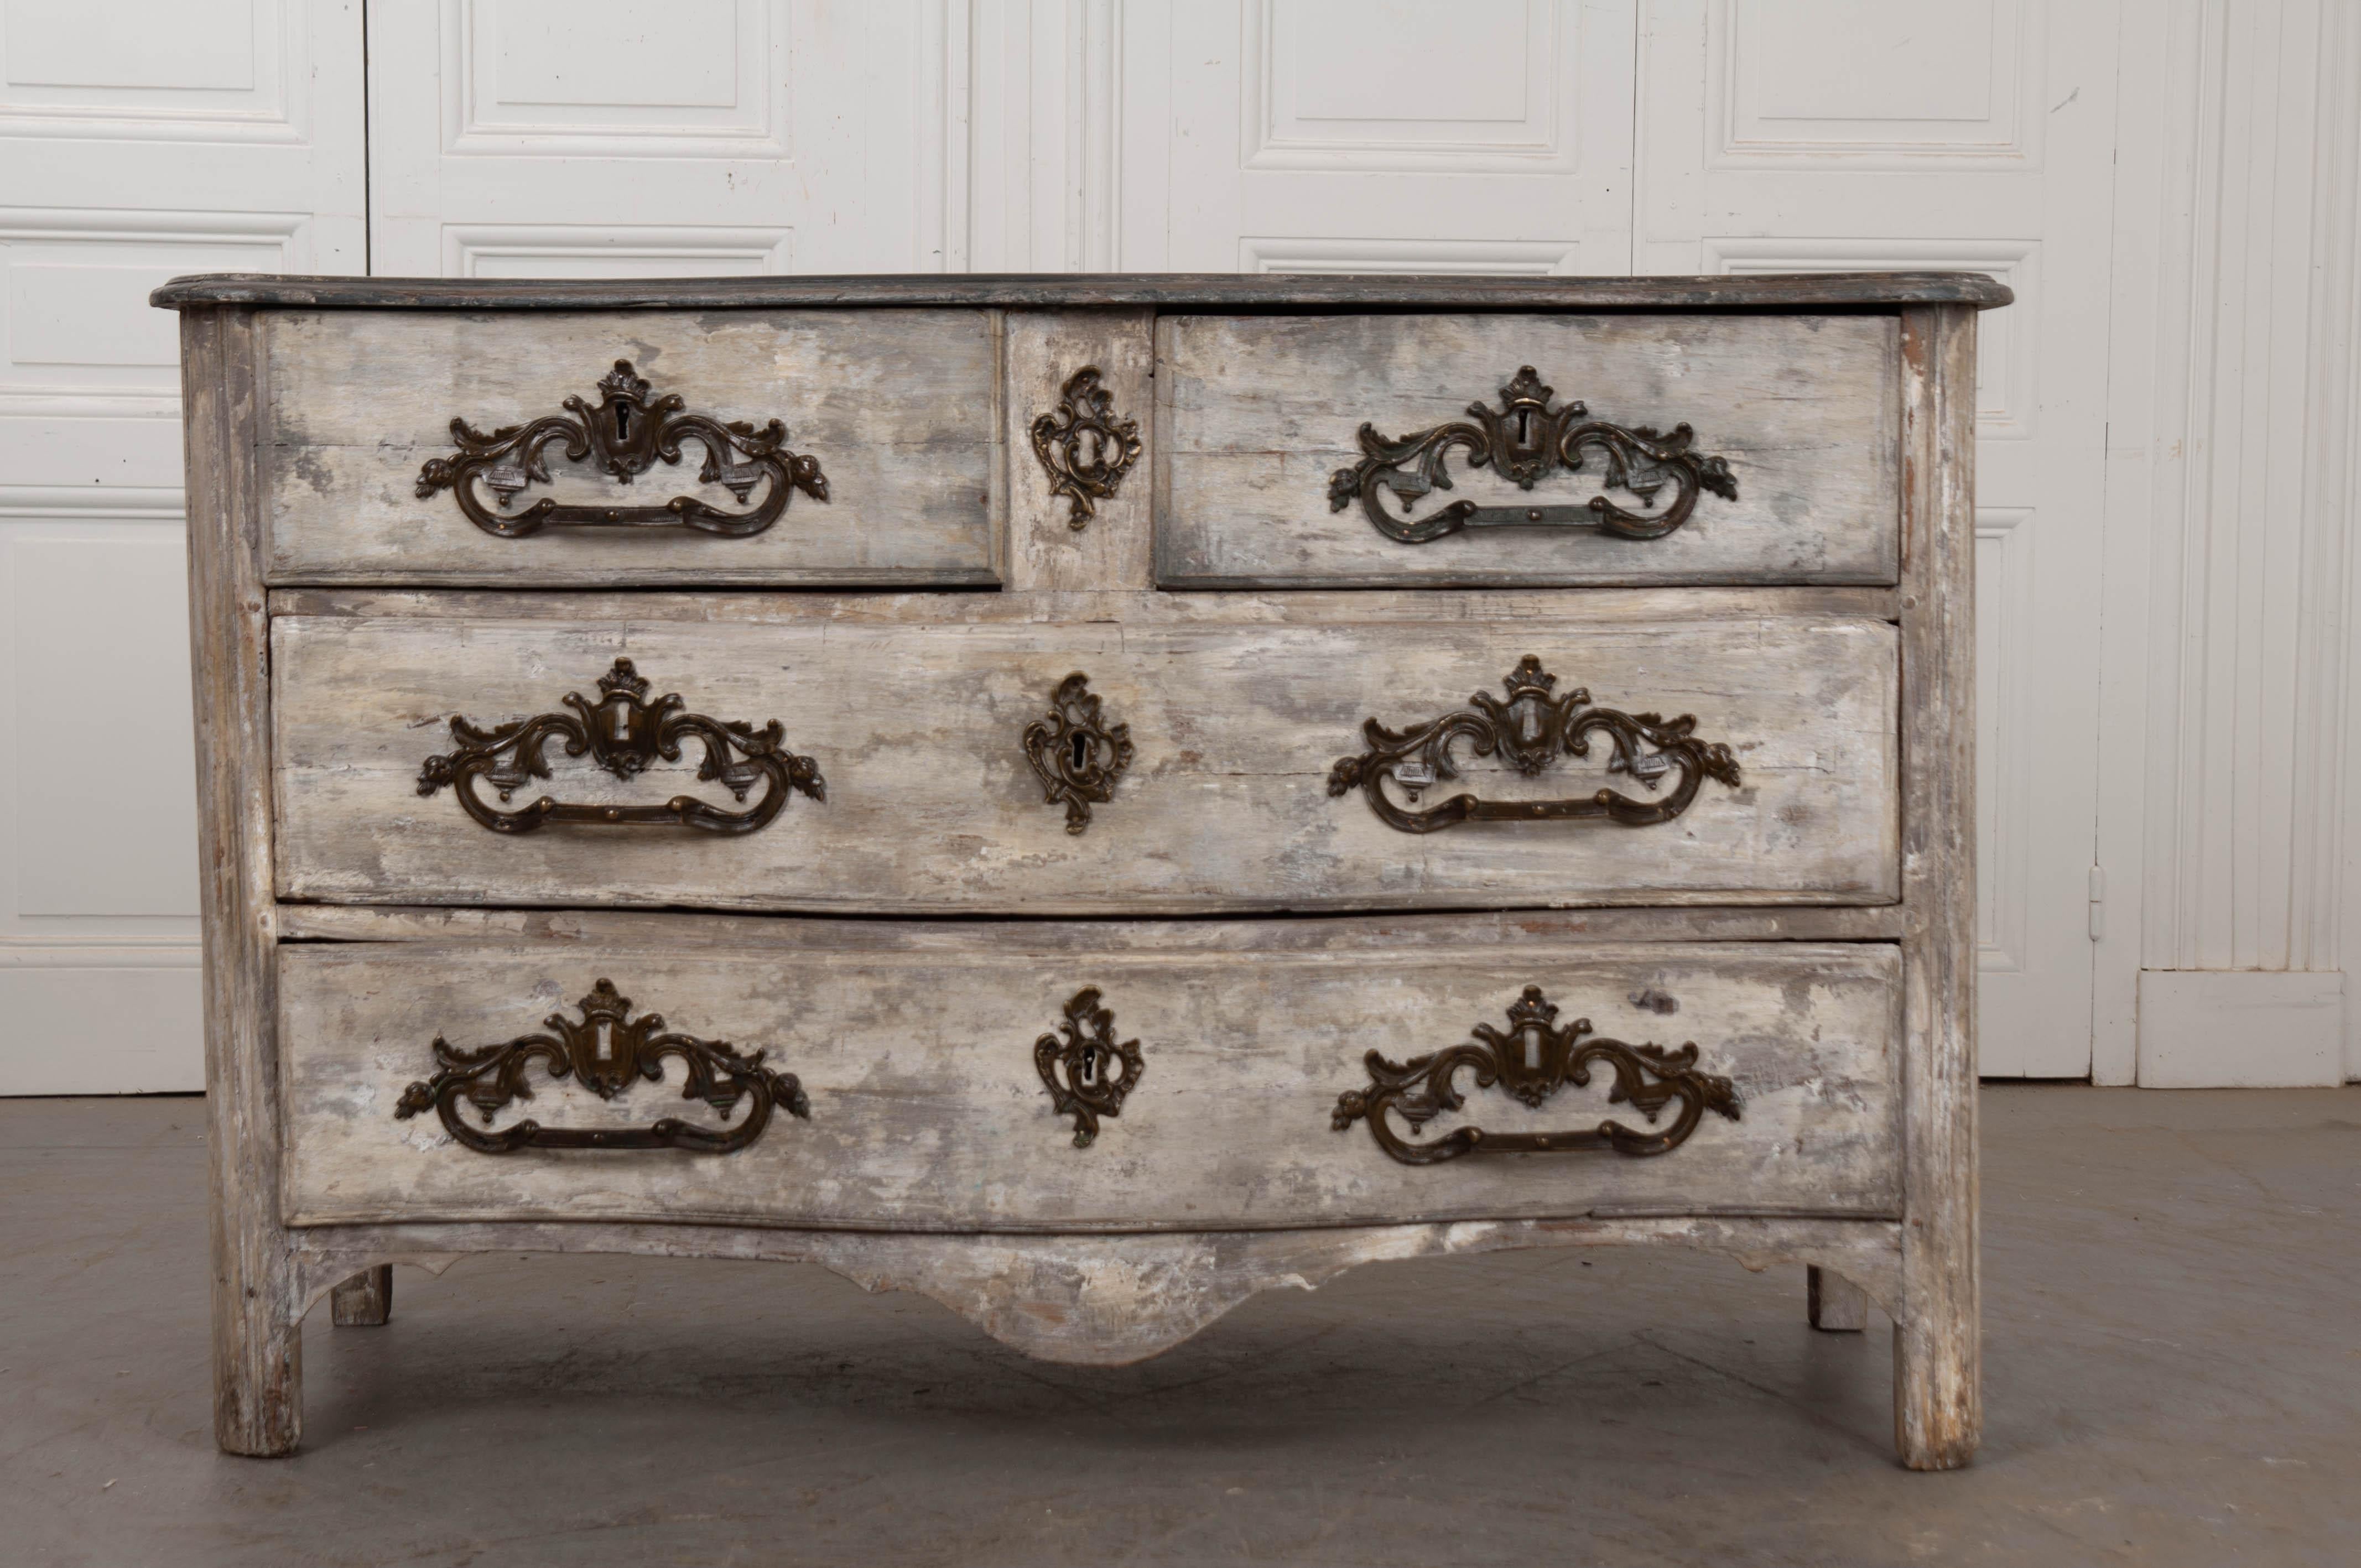 An exceptional Parisian commode, with painted finish, from 18th century, France. This four-drawer antique case piece features a shapely form and an outstandingly well-patinated finish. All drawers are equipped with large, decorative bronze pulls.